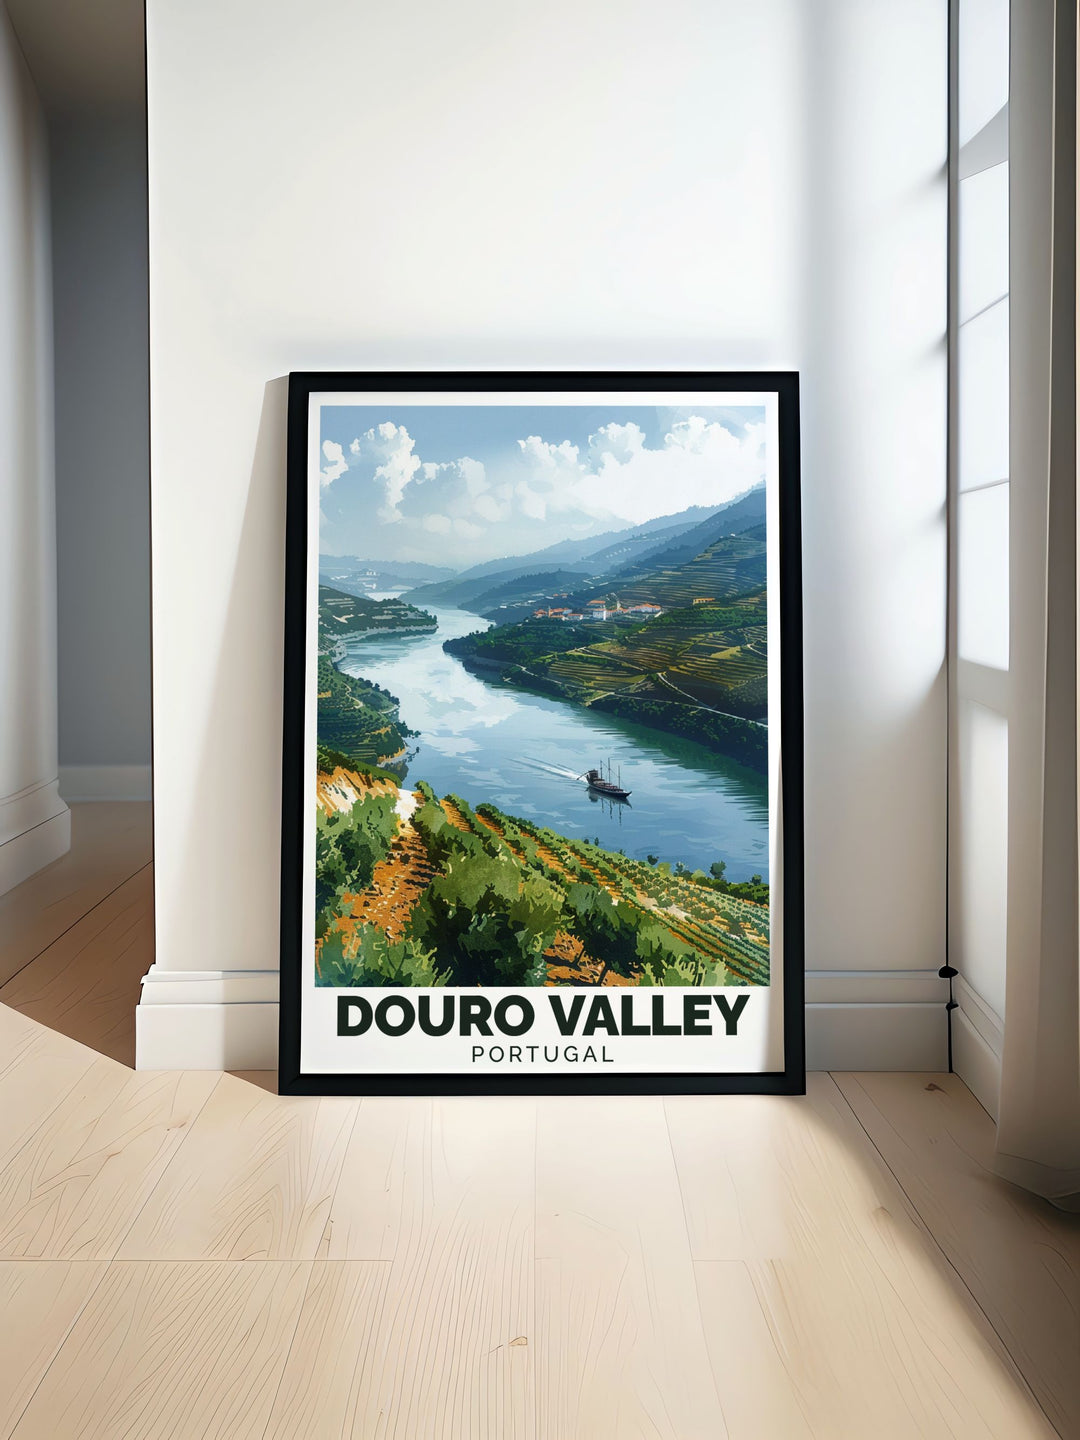 Framed art showcasing the stunning views of the Douro Valley, capturing the natural splendor and agricultural beauty of Portugals iconic wine region.